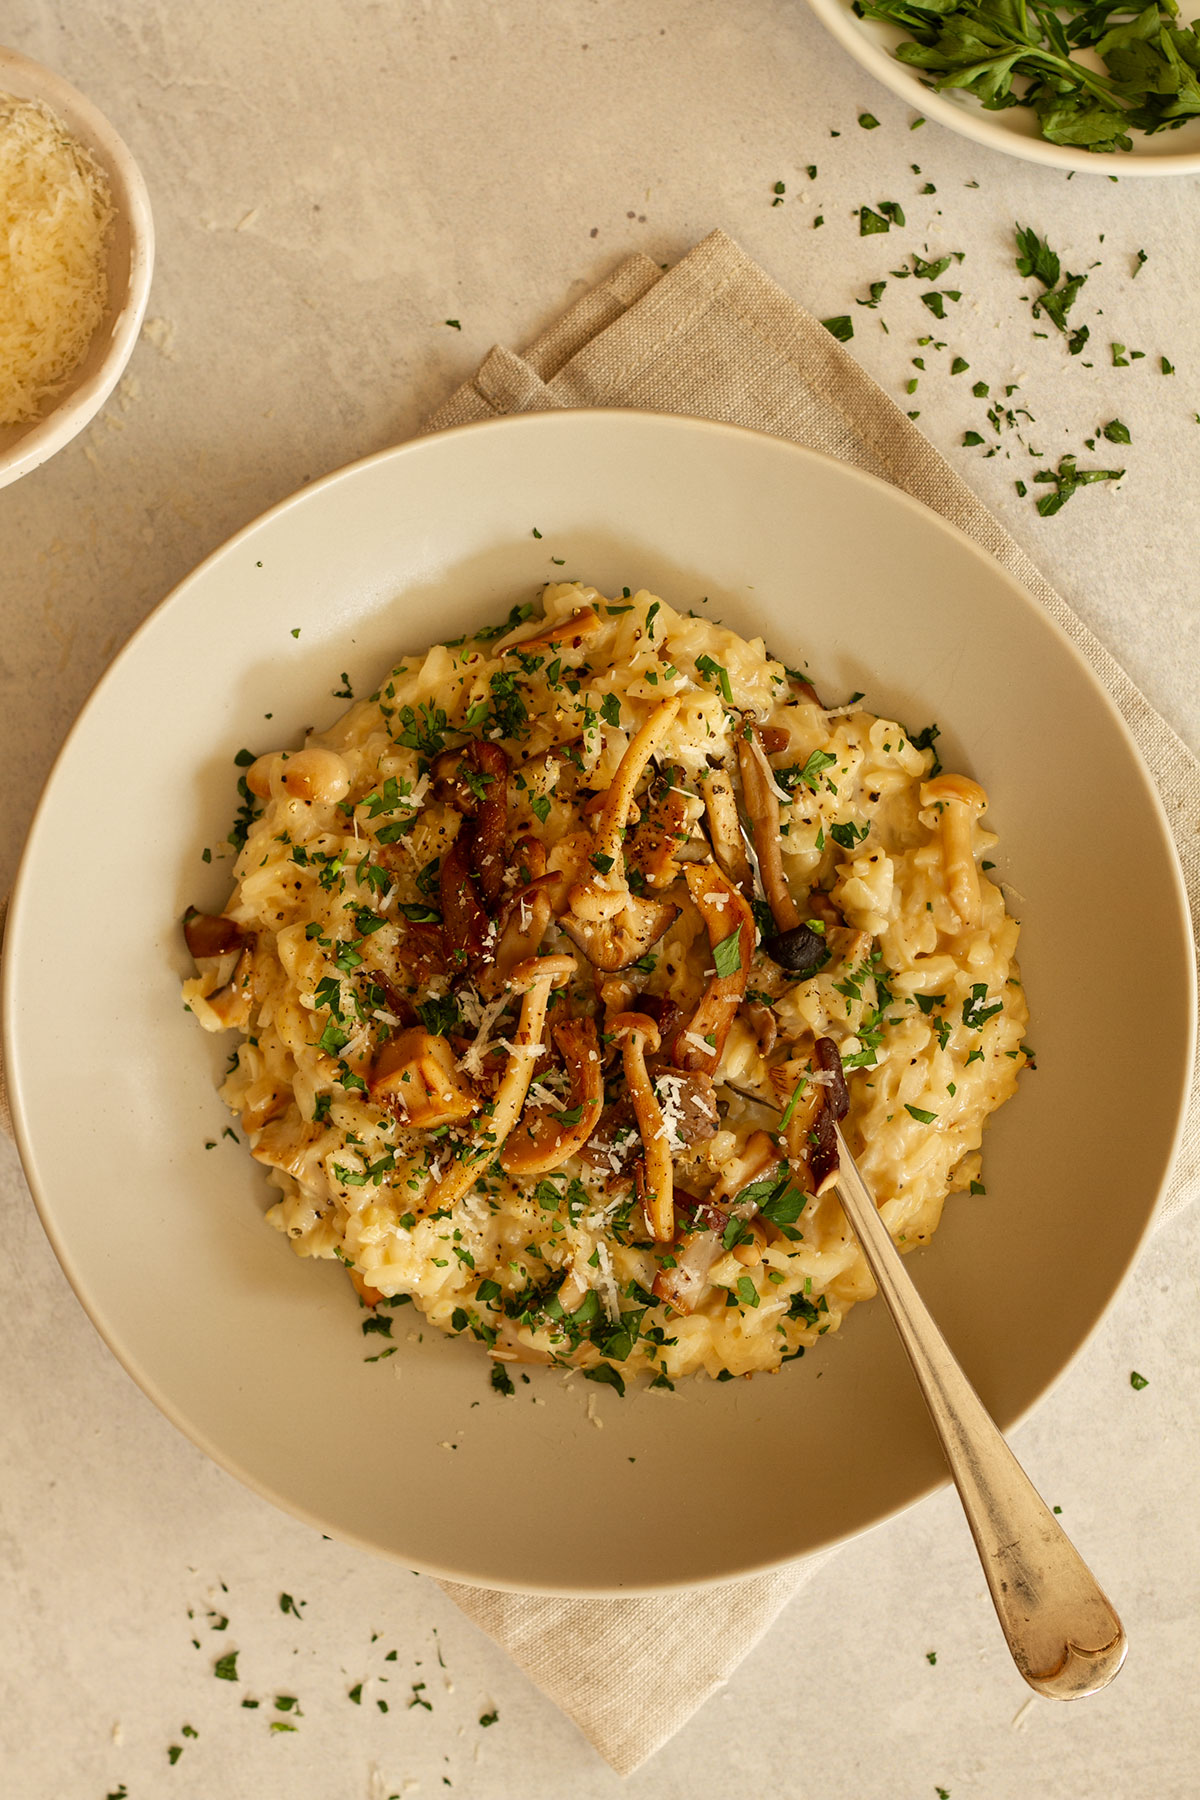 A serving of Mushroom Risotto on a cream coloured plate with parsley and Parmesan.